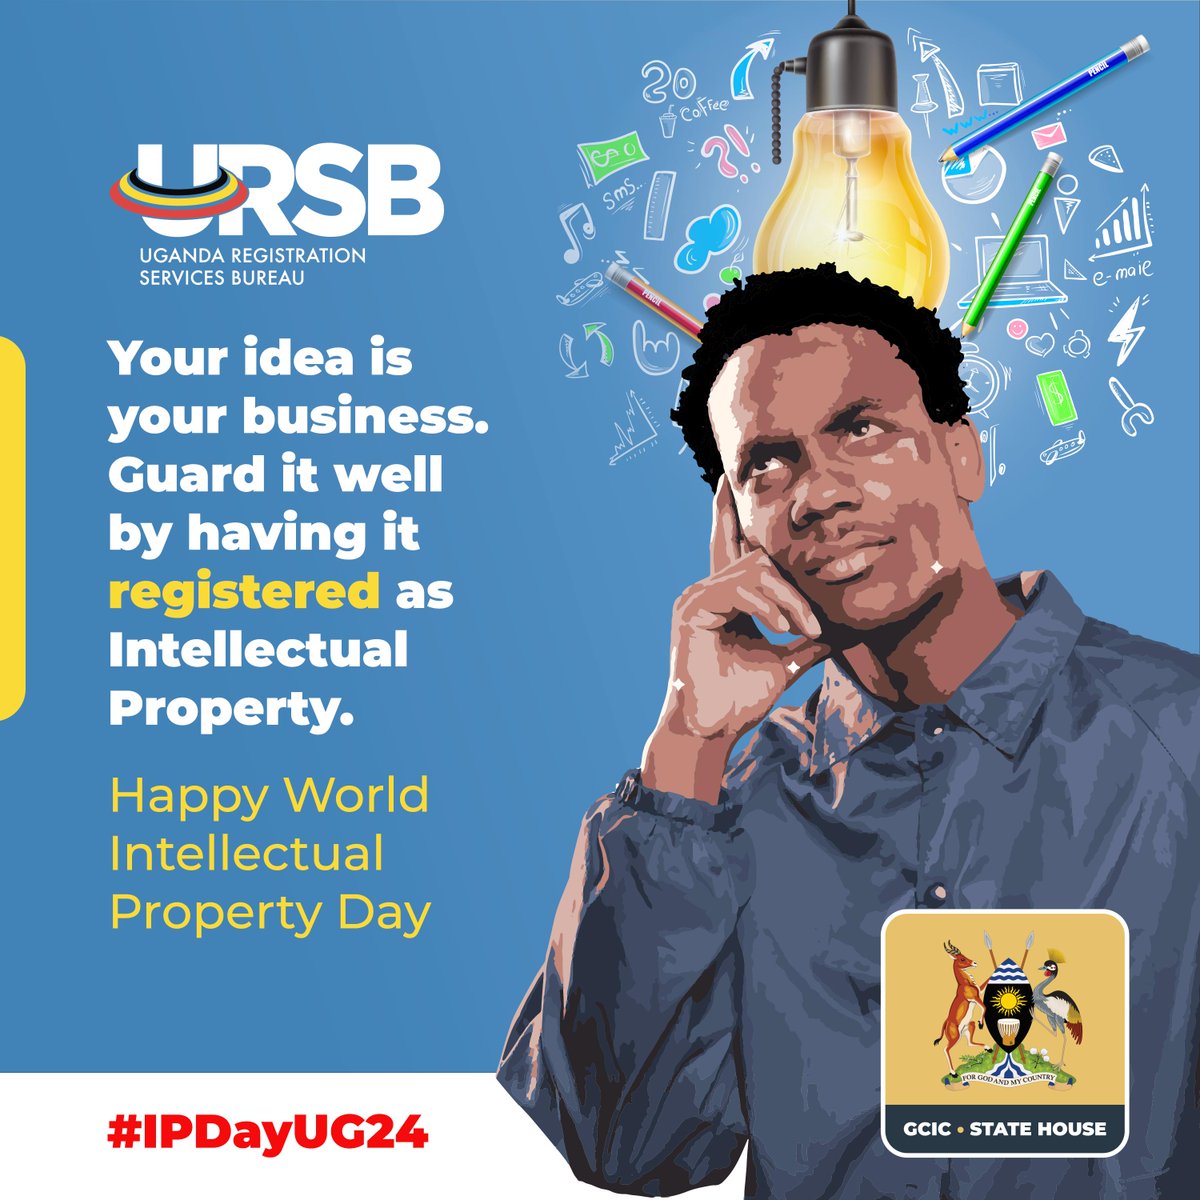 💡🧠✍️Intellectual property refers to the ownership of creative ideas and concepts, and having formal registrations for business🛒 ideas can prevent infringements🛑.

#WorldIPDay #IPDayUg24